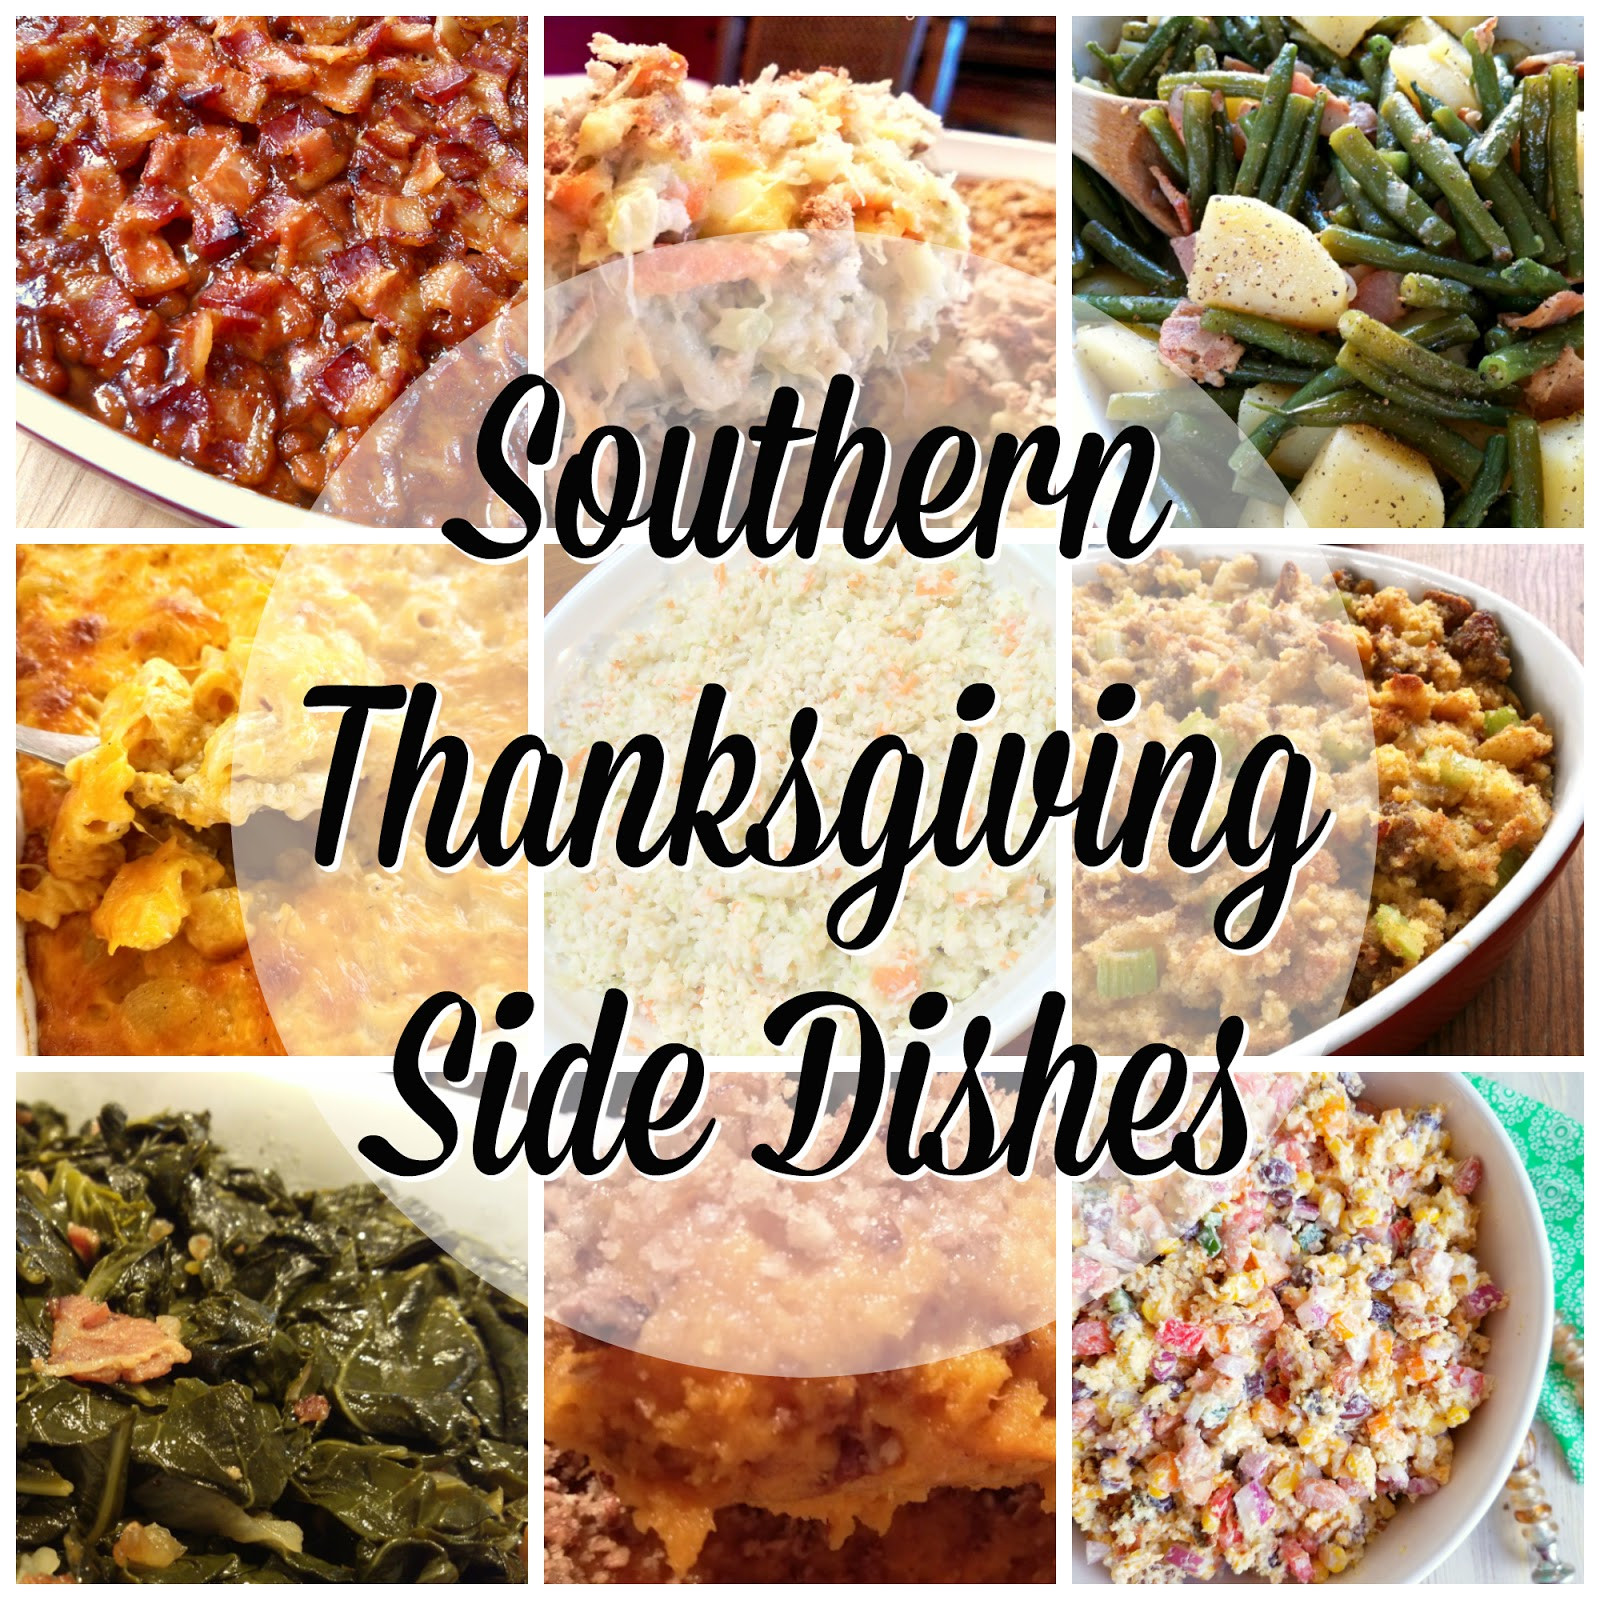 Thanksgiving Side Dishes Recipes
 South Your Mouth Southern Thanksgiving Side Dishes